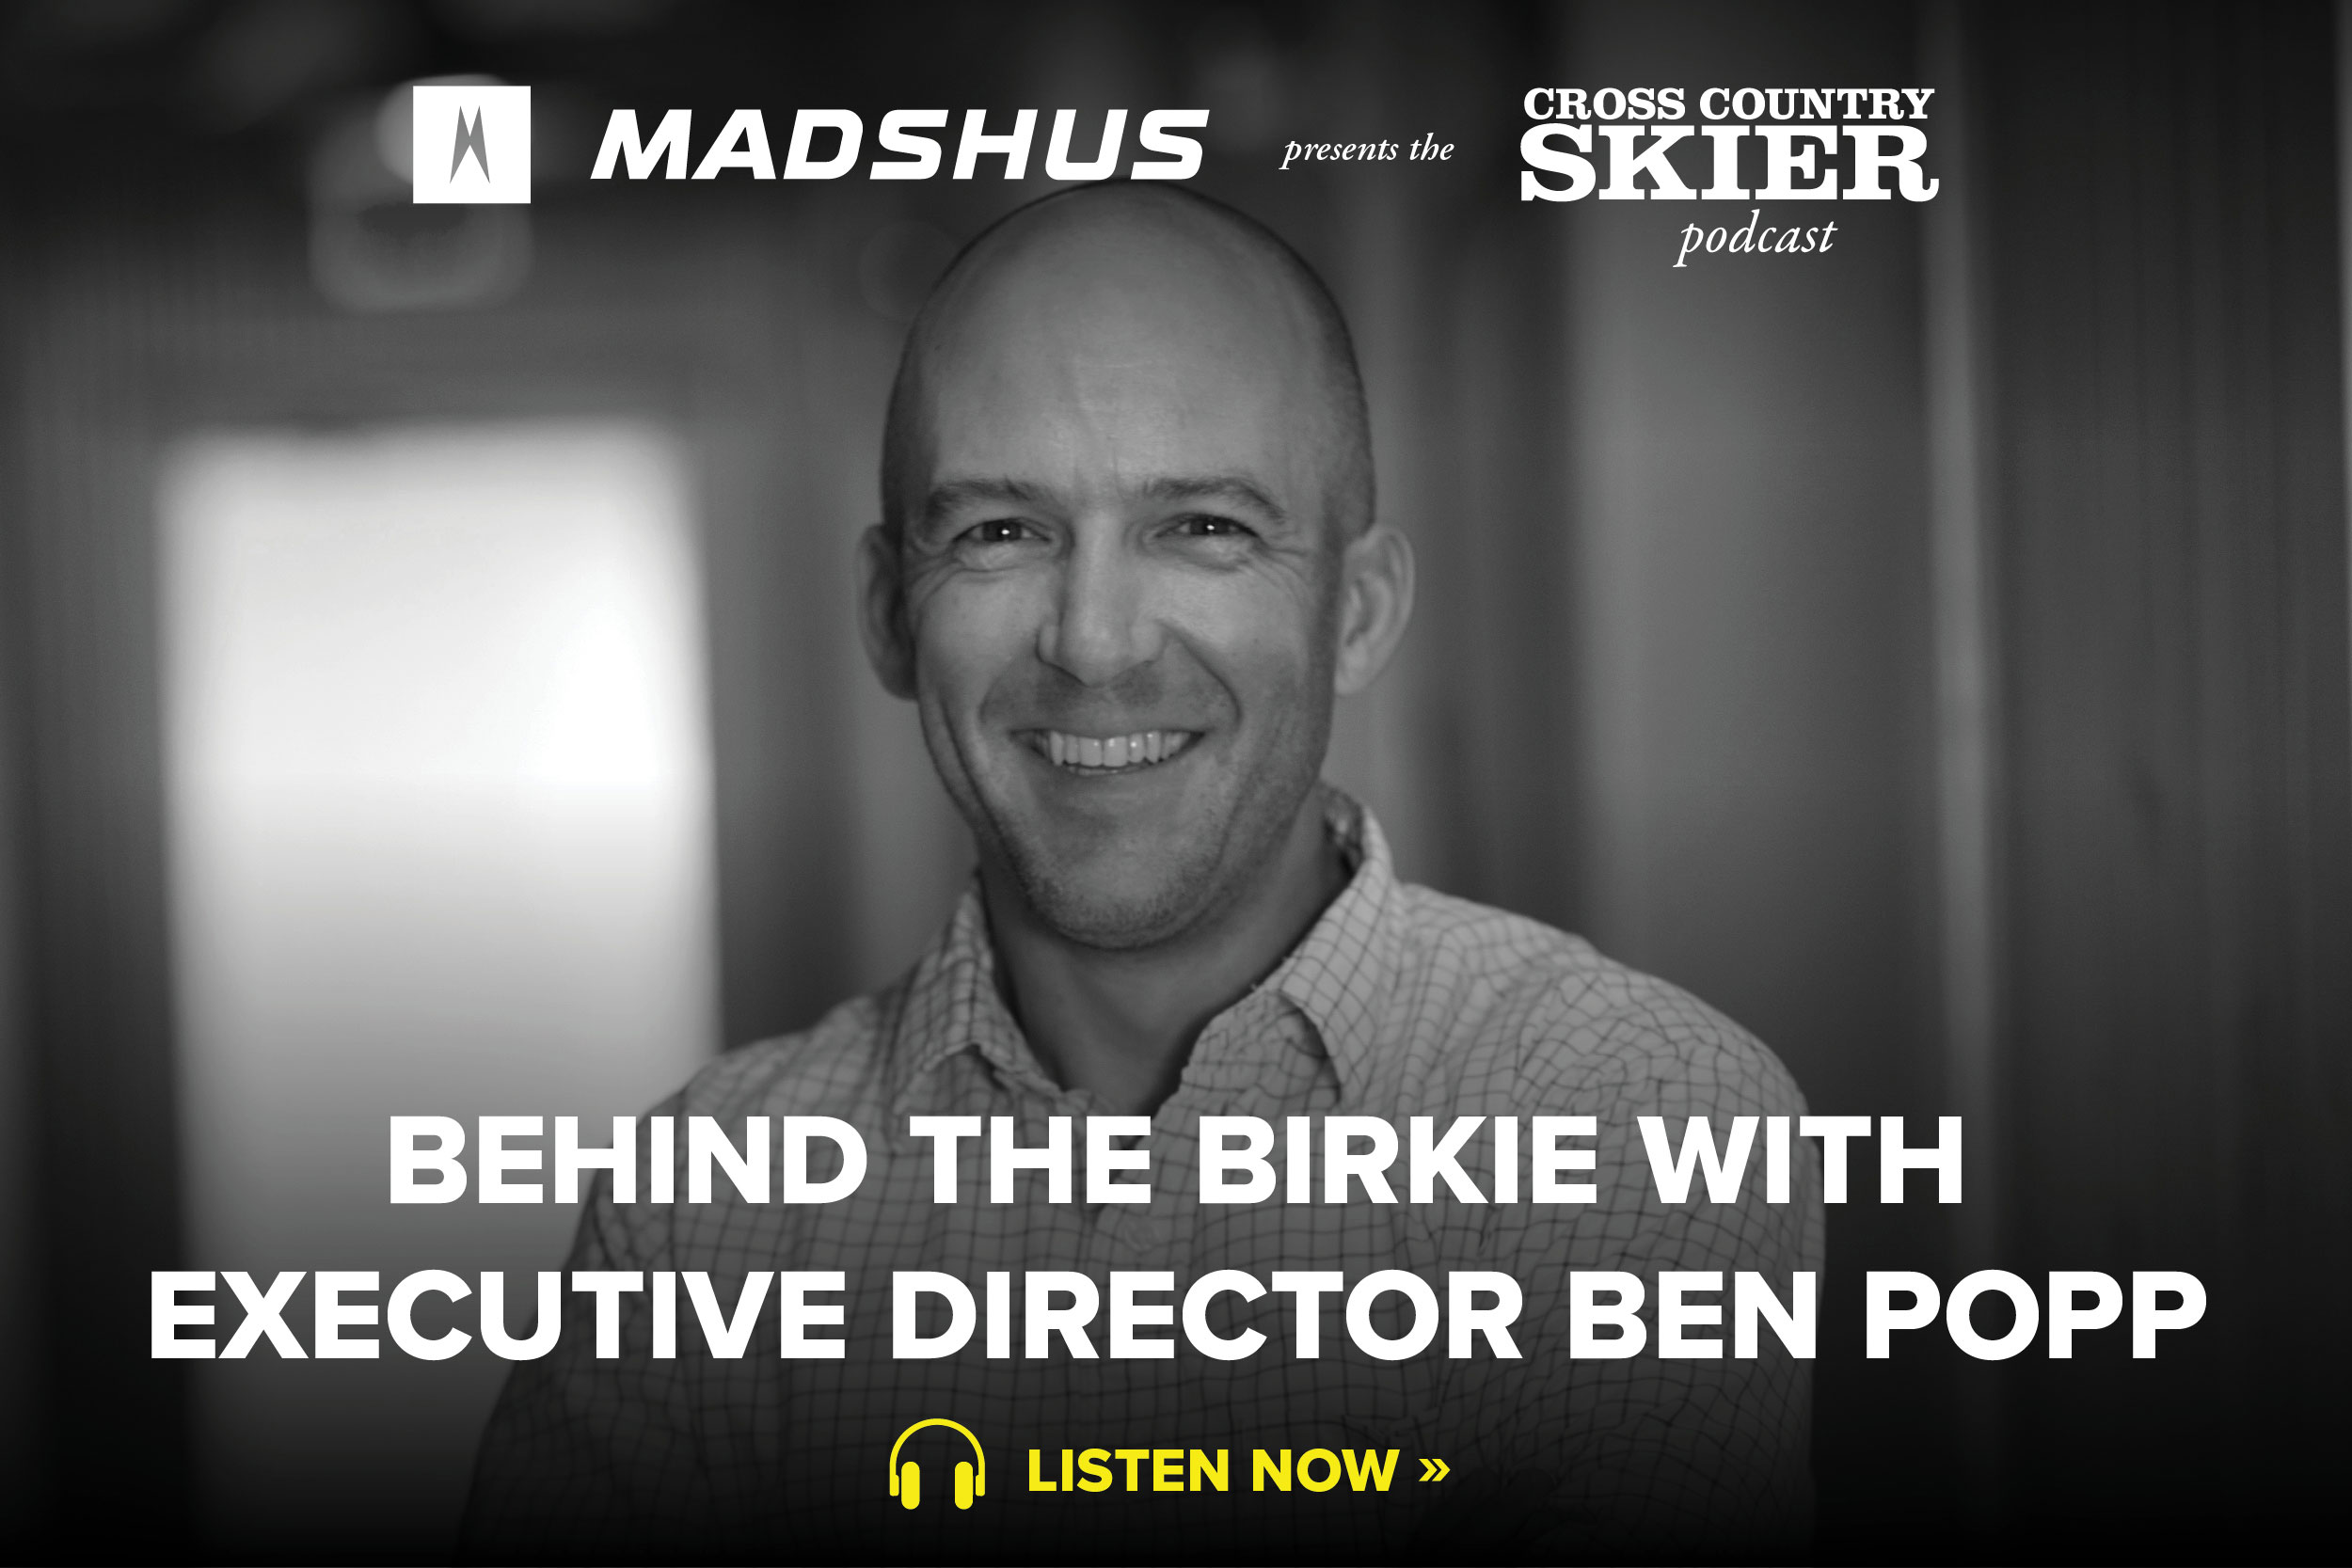 Behind the Birkie with Executive Director Ben Popp | The Cross Country Skier Podcast